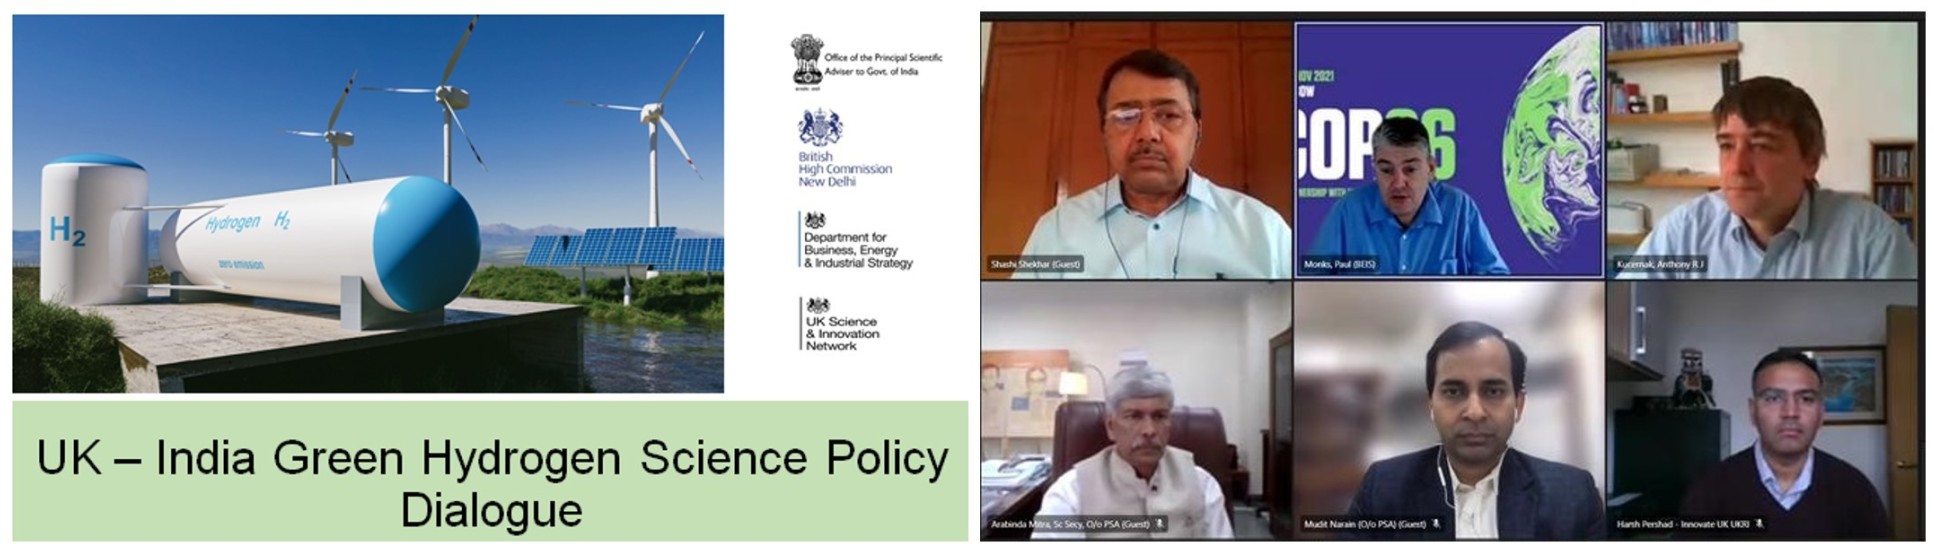 UK-India Green Hydrogen Science Policy Dialogue